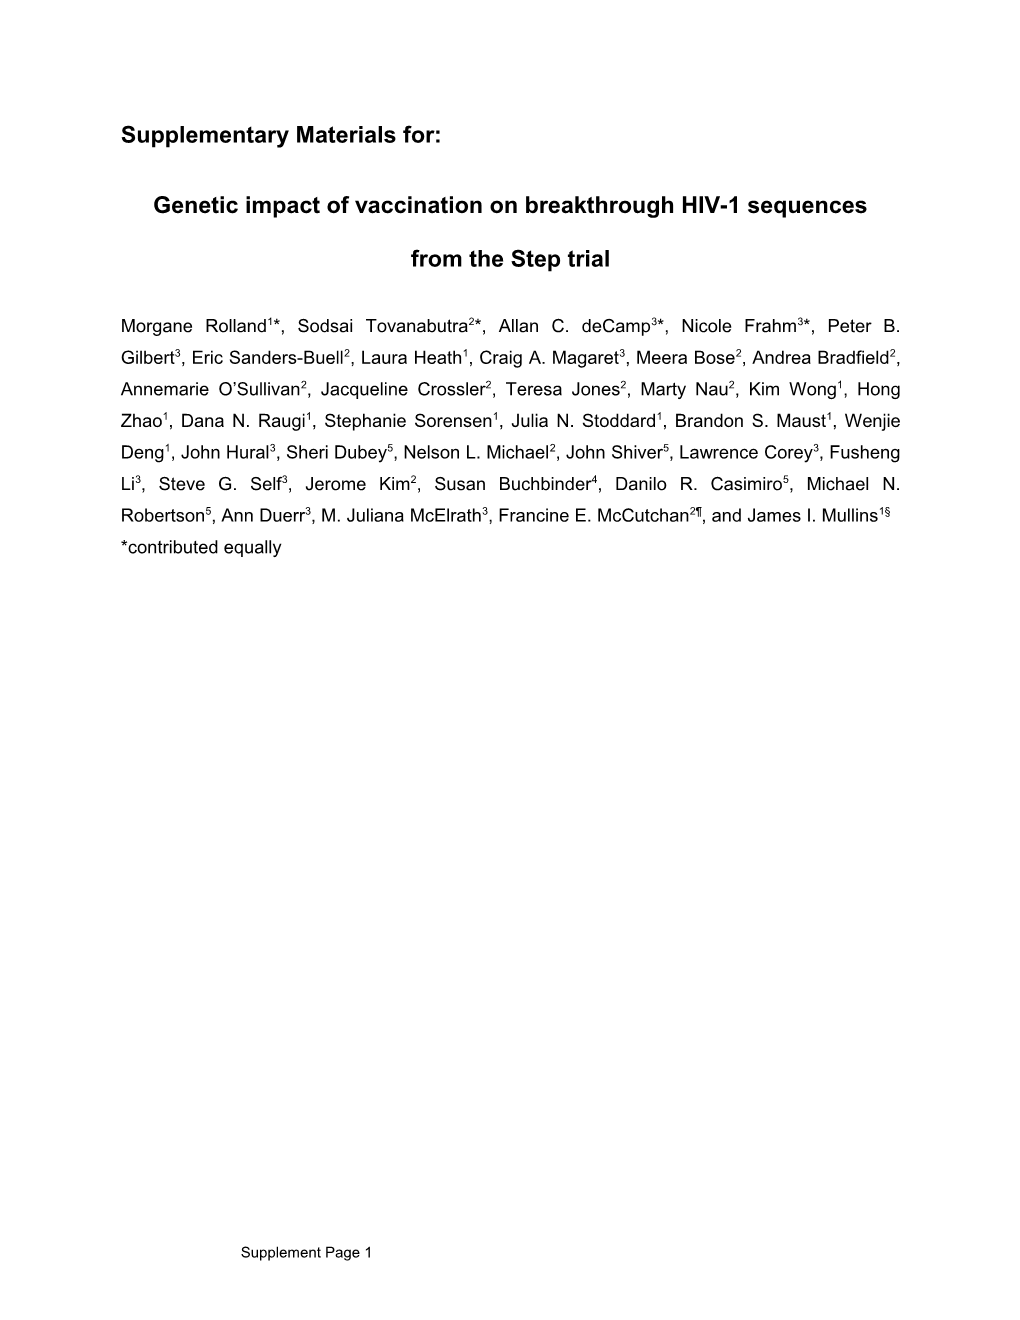 Genetic Impact of Vaccination on Breakthrough HIV-1 Sequences